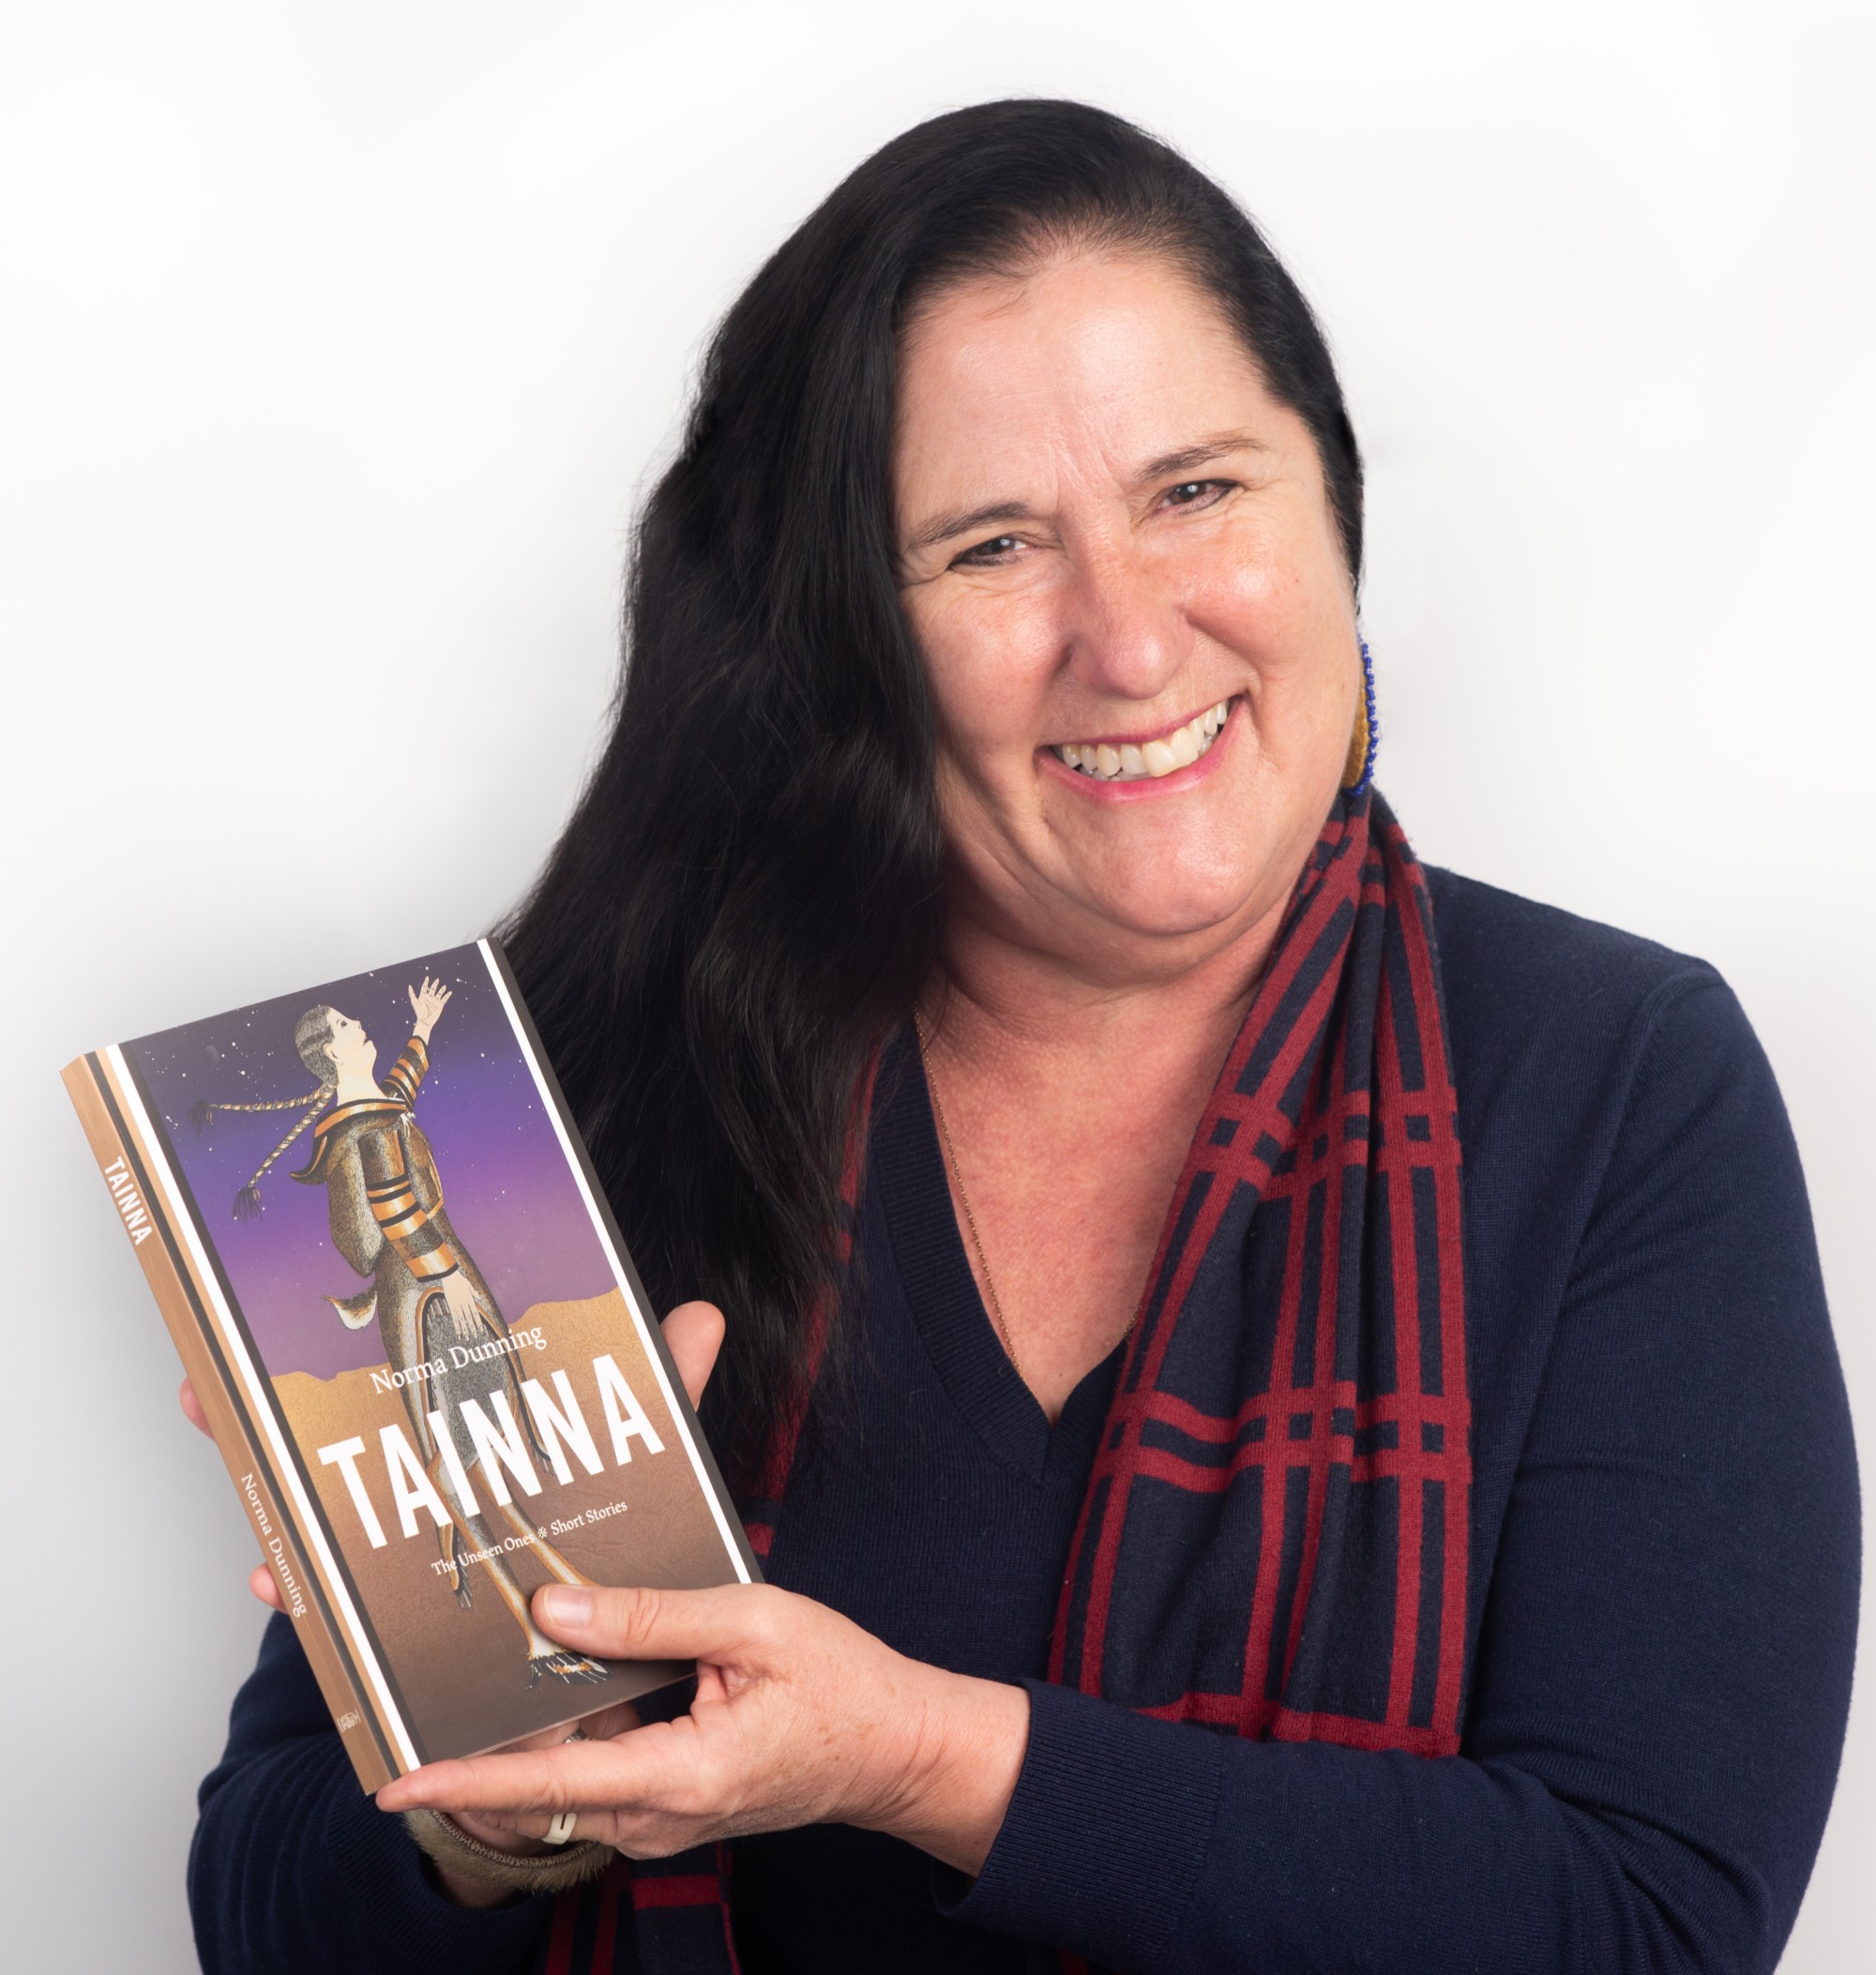 Norma Dunning holds a copy of her award-winning short story collection Tainna: The Unseen Ones